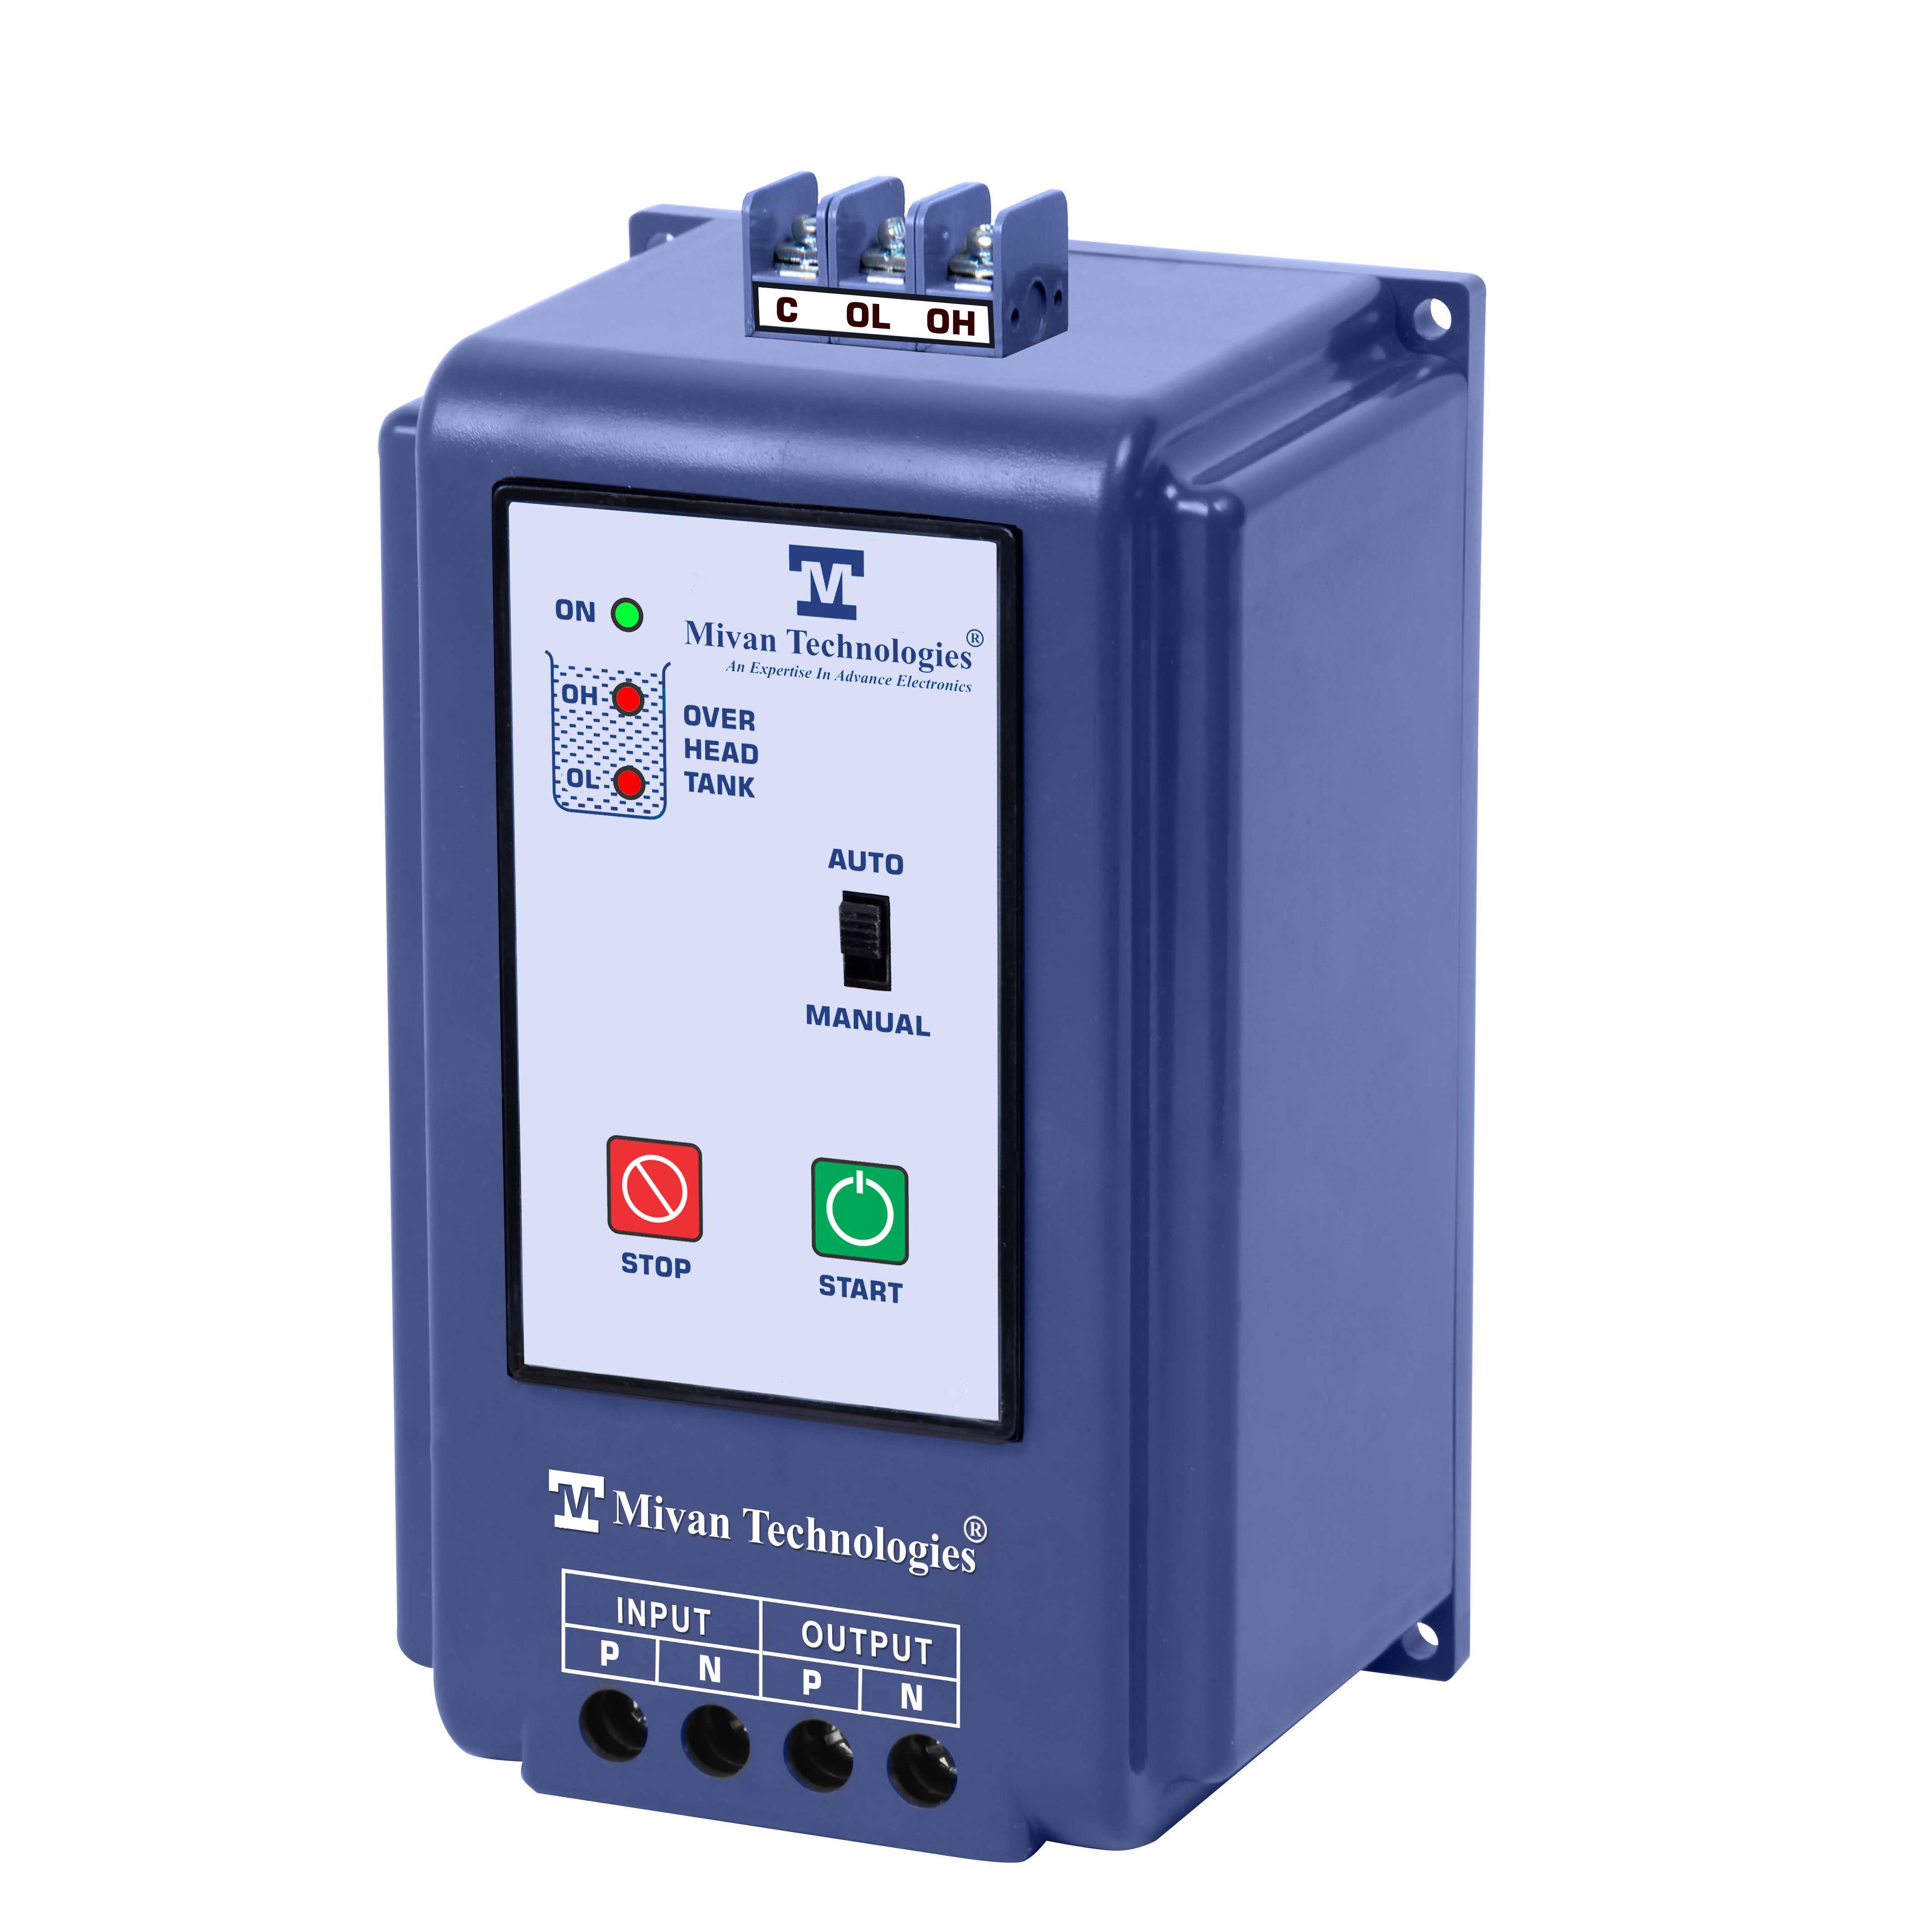 WLC S HD Semi Automatic Manual start and Auto stop water controller with tank level indications and bypass facility